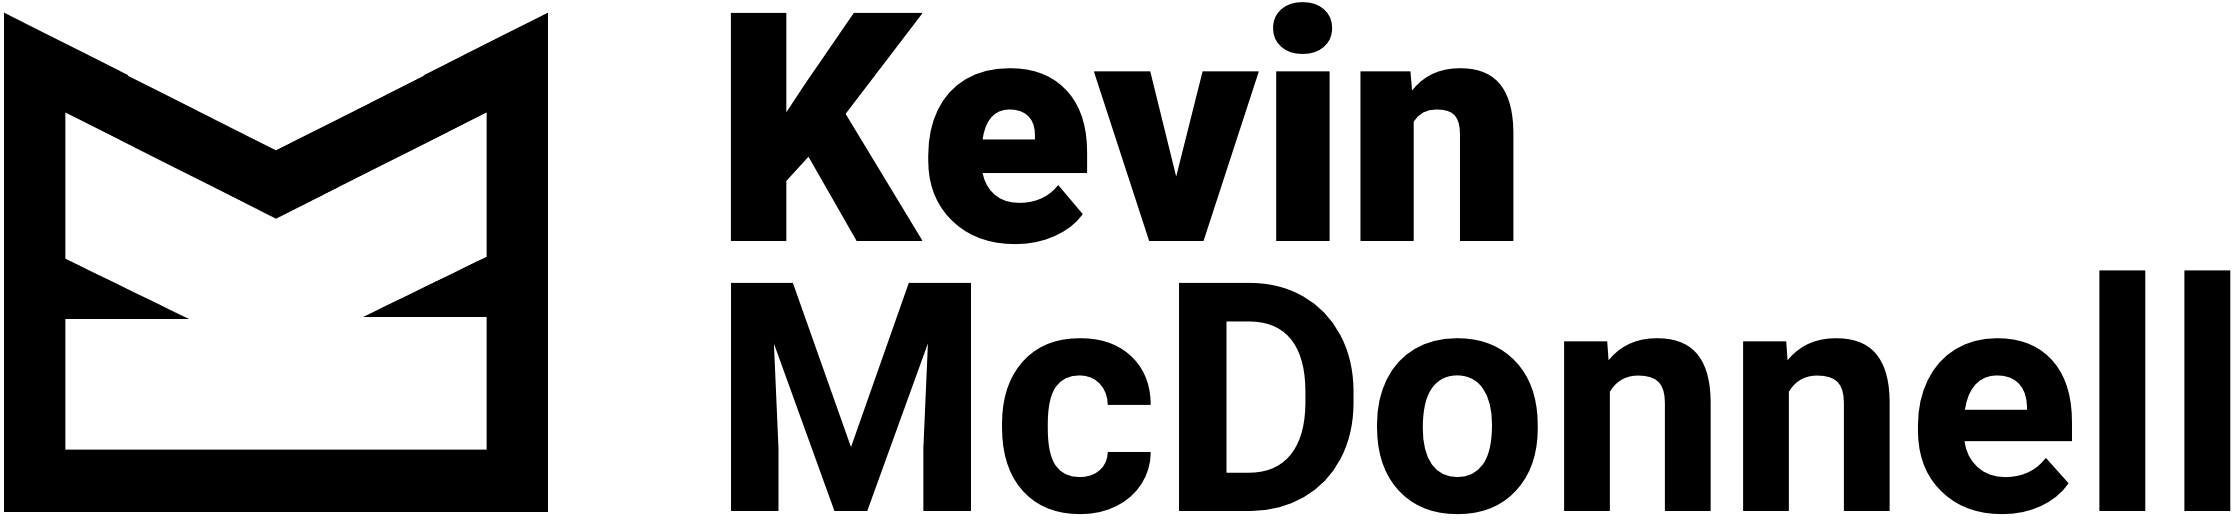 Kevin McDonnell - Business & Executive Advisor, Coach and Consultant